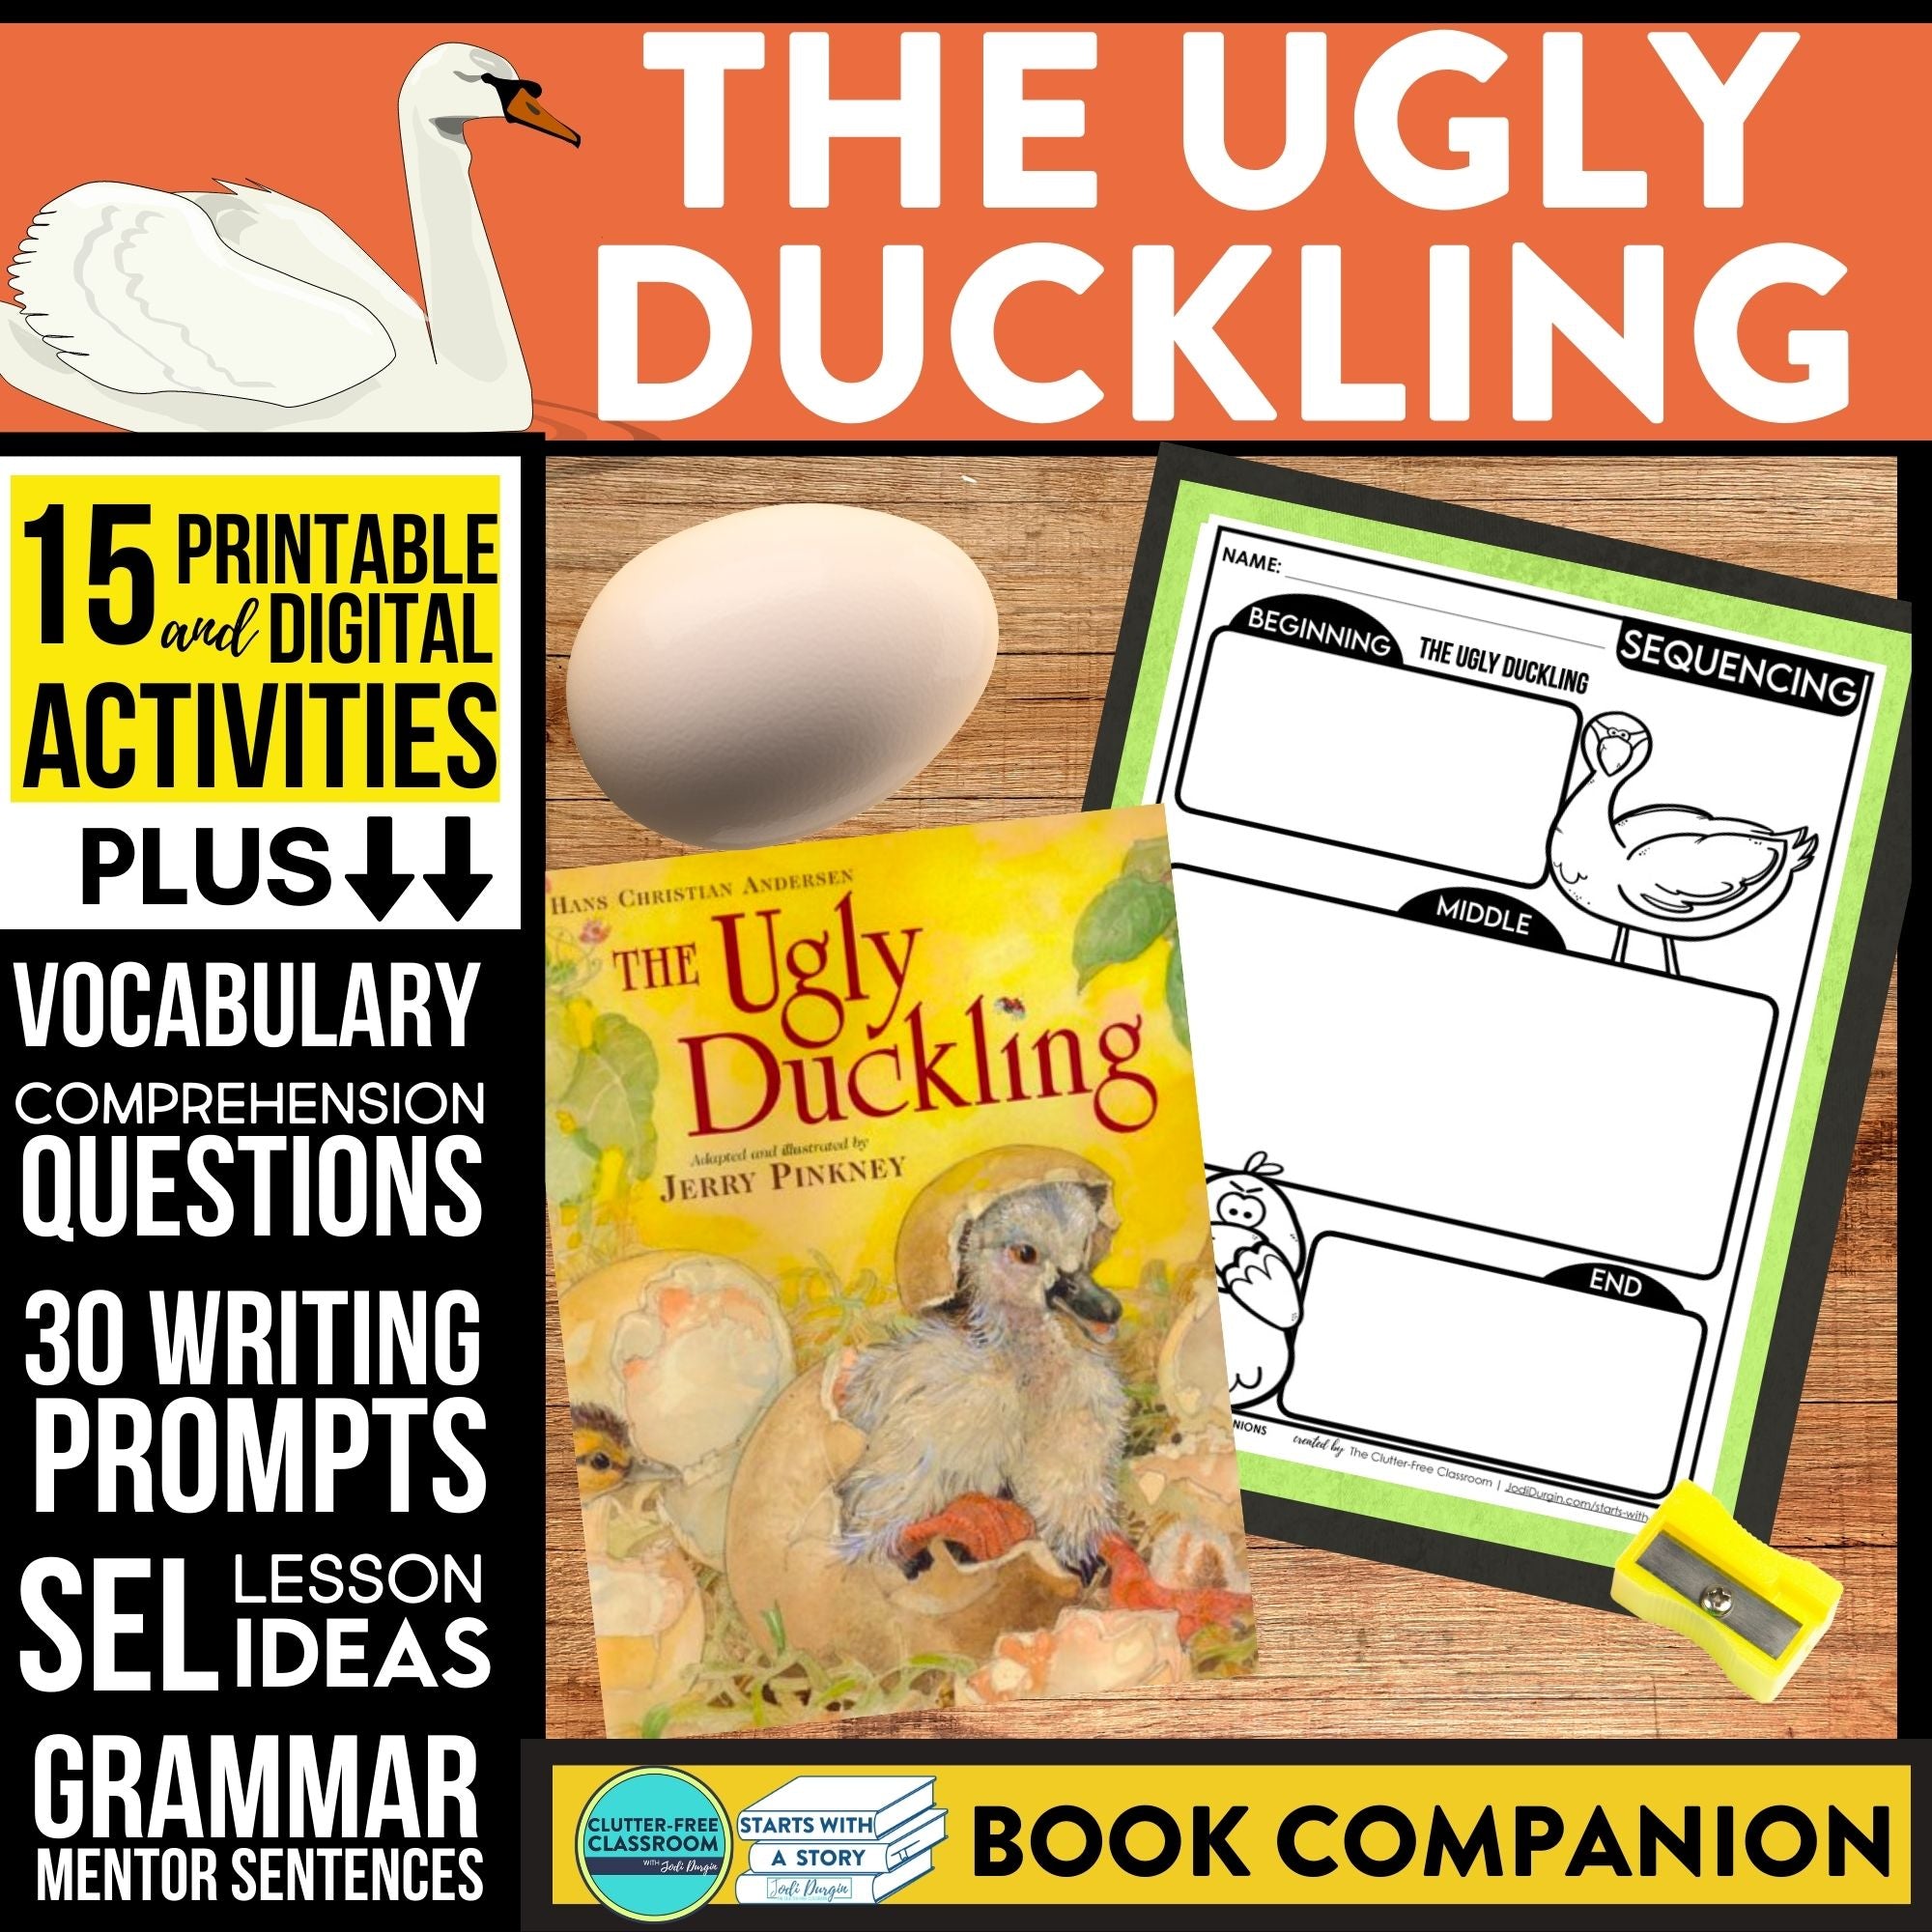 THE UGLY DUCKLING activities and lesson plan ideas